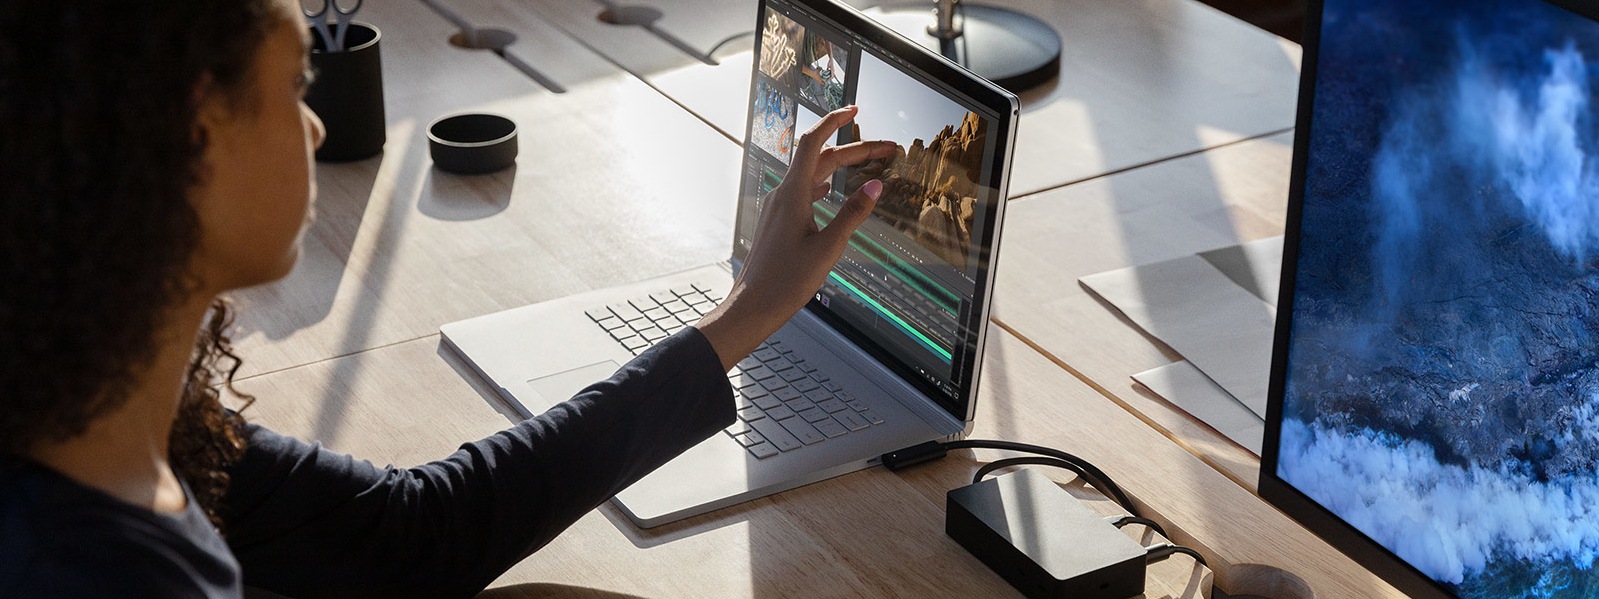 A woman interacts with Adobe Premier Pro on her Surface Book 3, which is connected to a 4K monitor on her desk